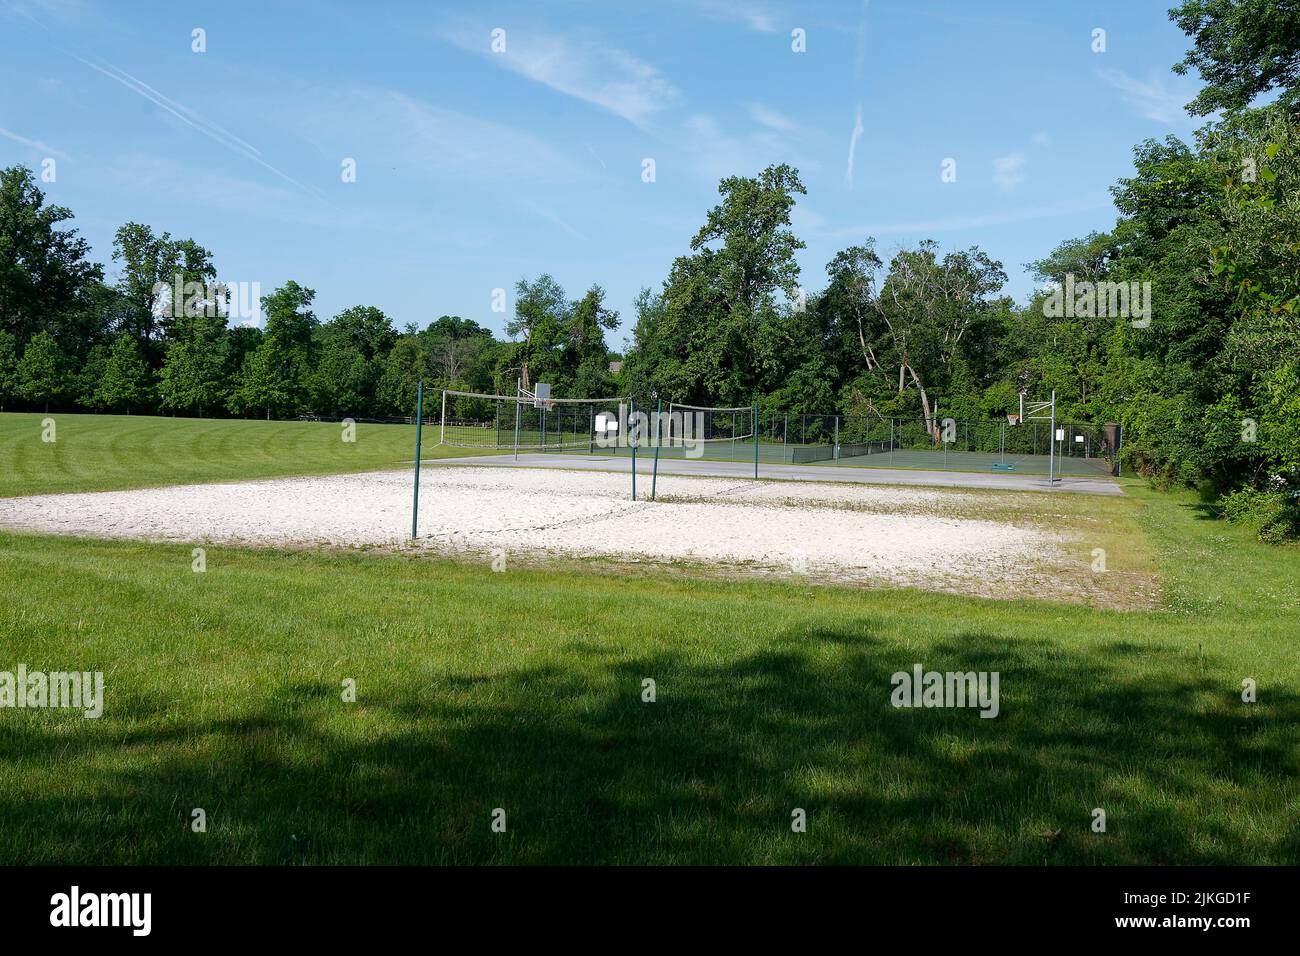 volley ball courts, tennis courts, waiting for people, recreation, sport, fun, exercise, grassy fields surrounding, trees, summer Stock Photo